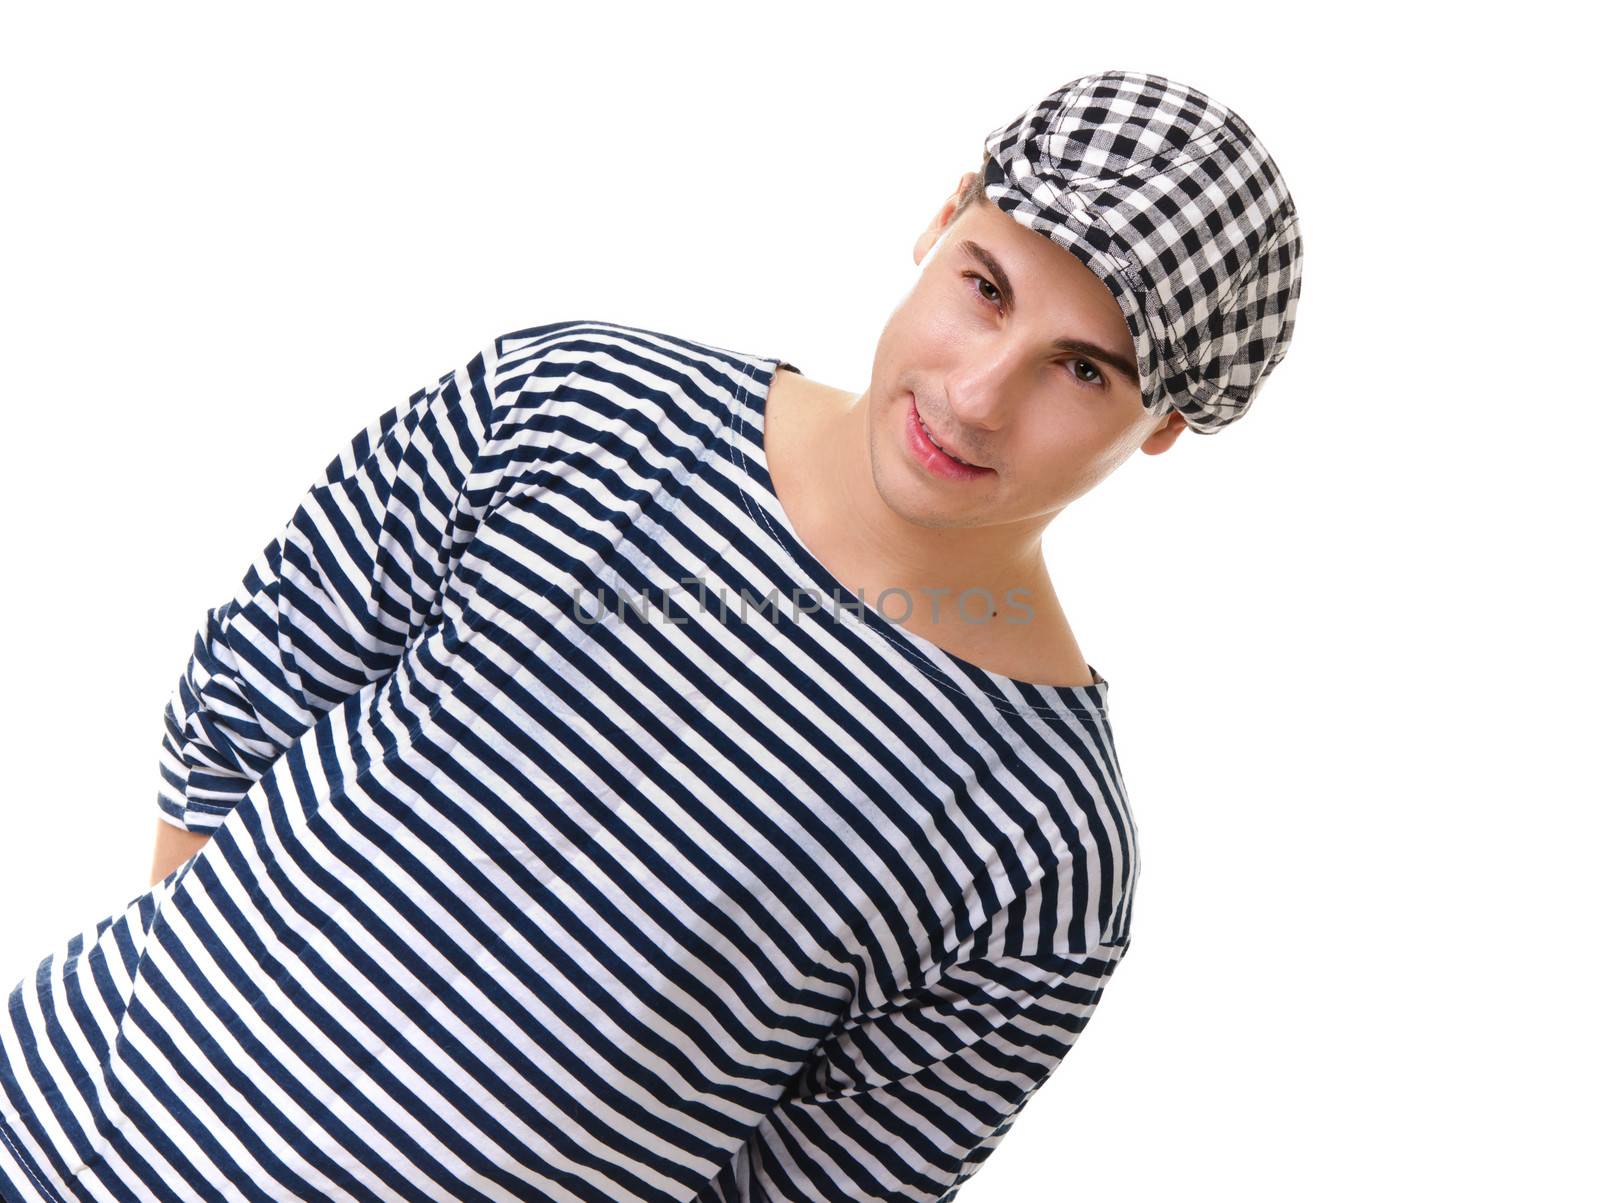 Look naughty handsome young man portrait in stylish striped dress and cap